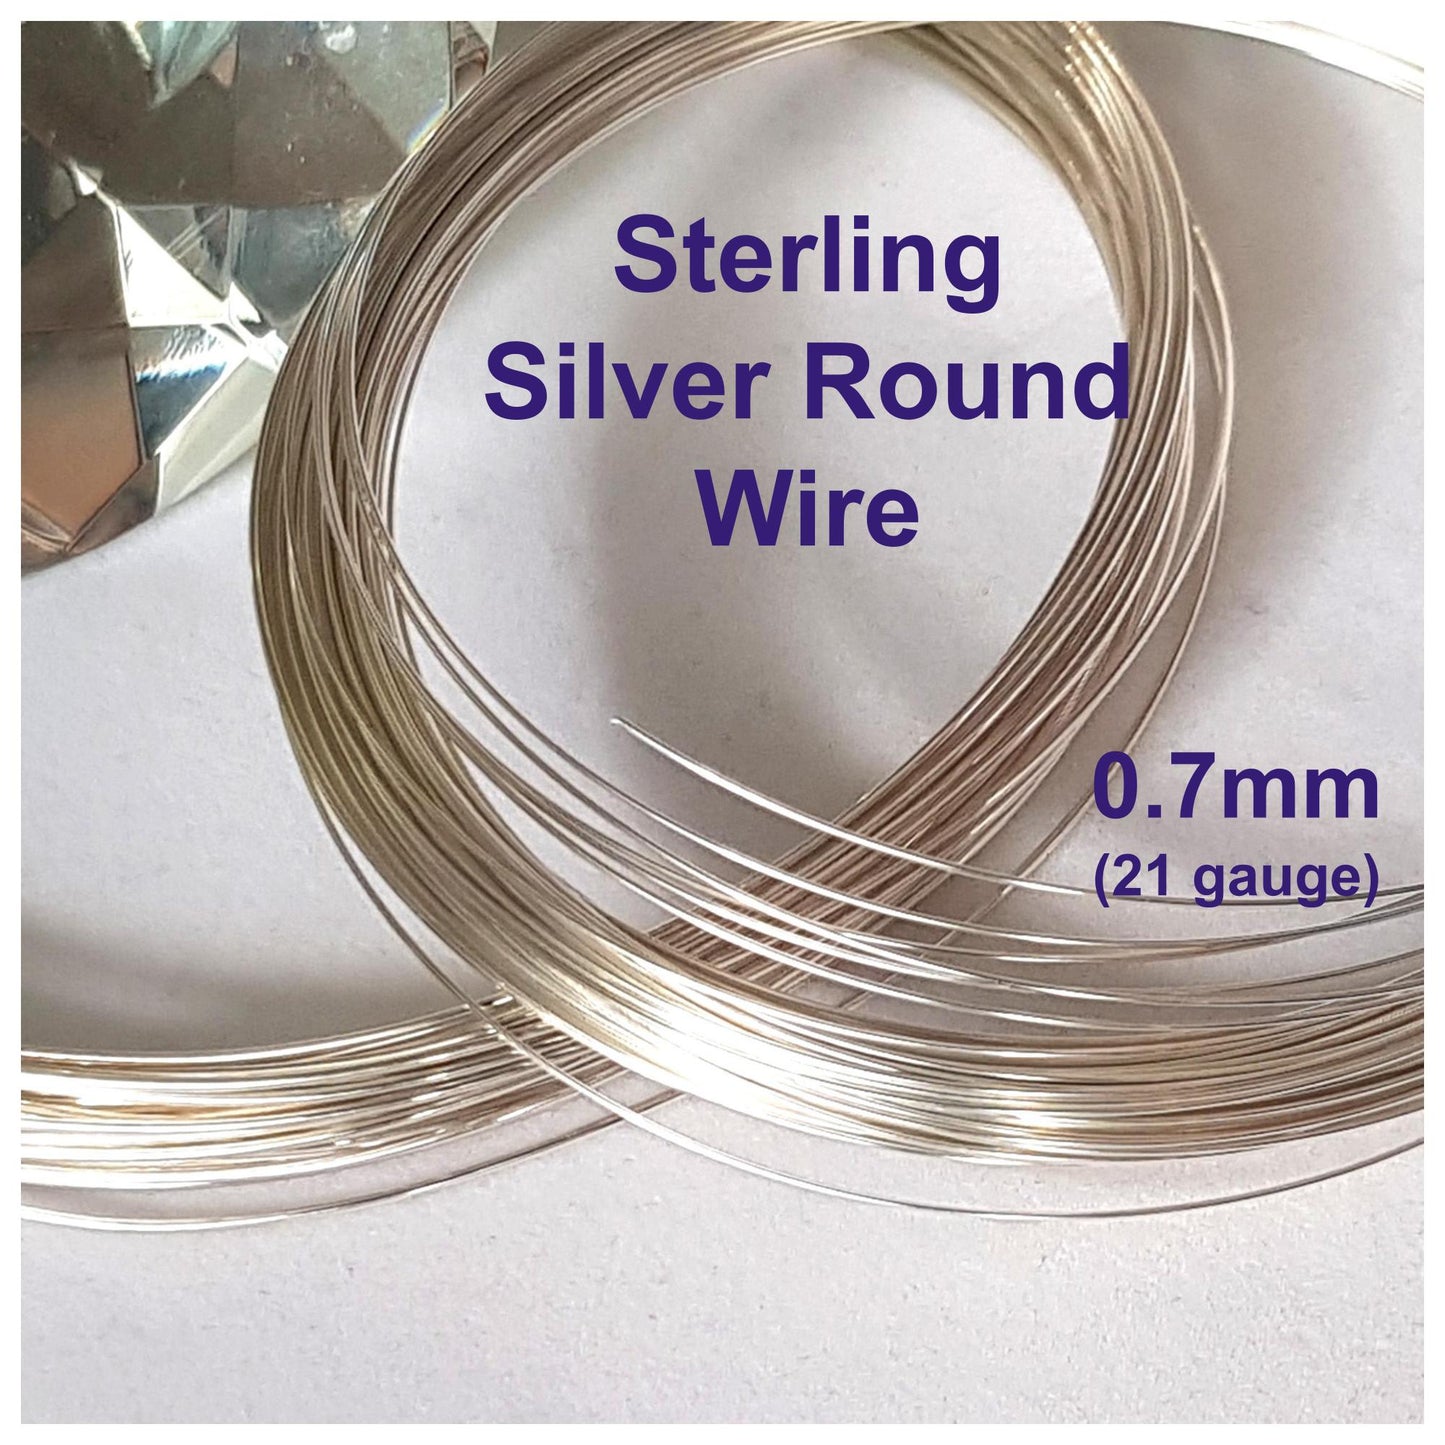 FAB Metal -  0.7mm Round Sterling Silver Wire ( 21 gauge) |  Jewellery Making Supply